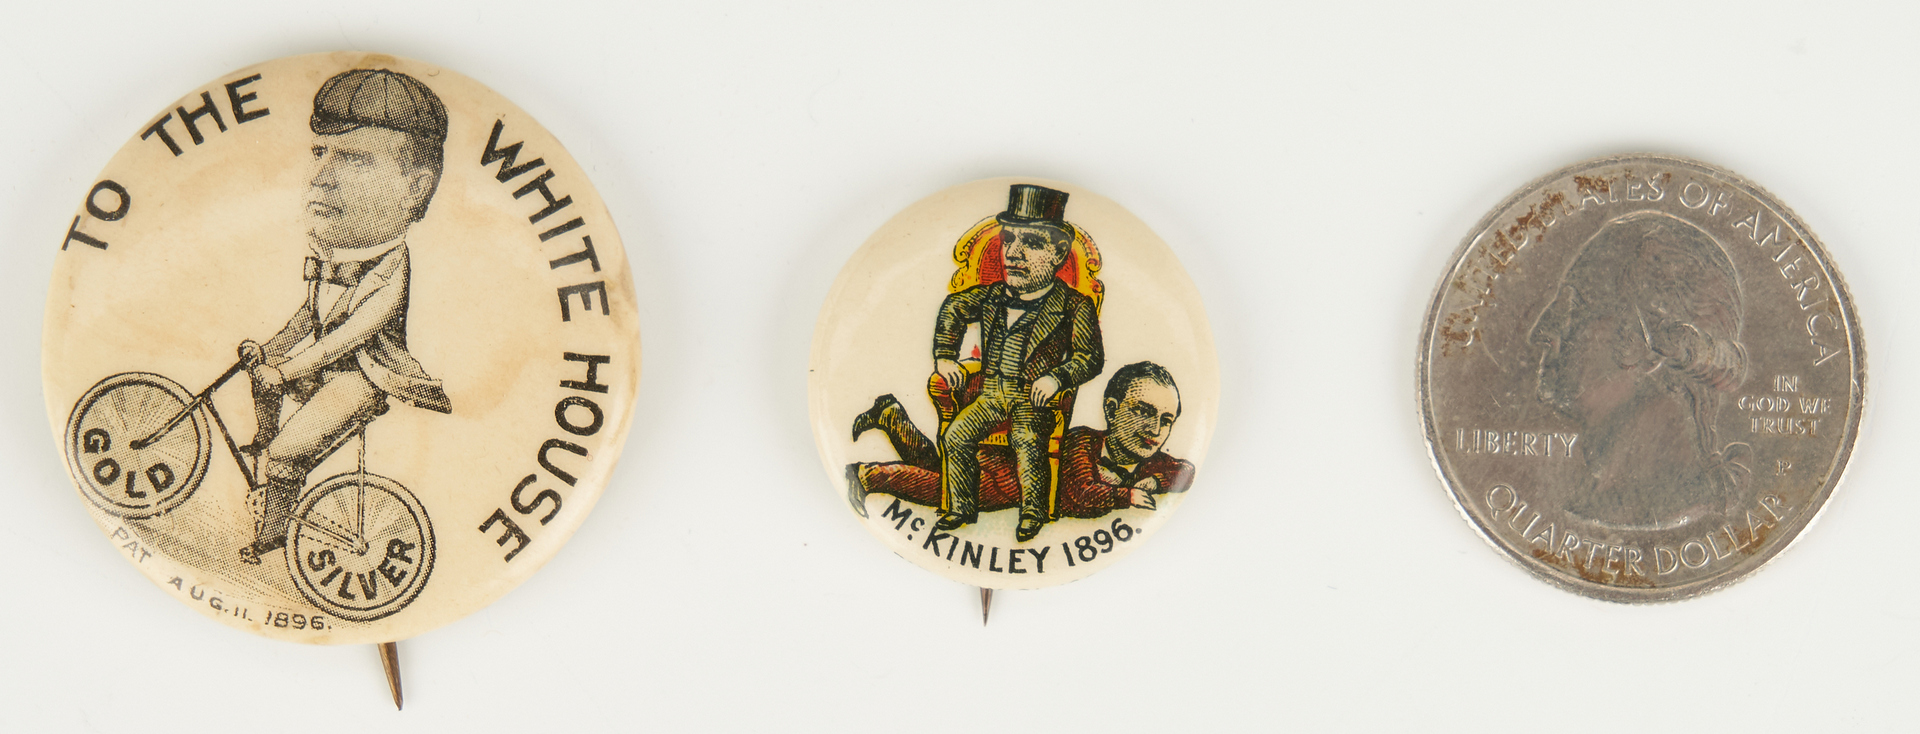 Lot 666: 2 McKinley First Presidential Campaign Buttons